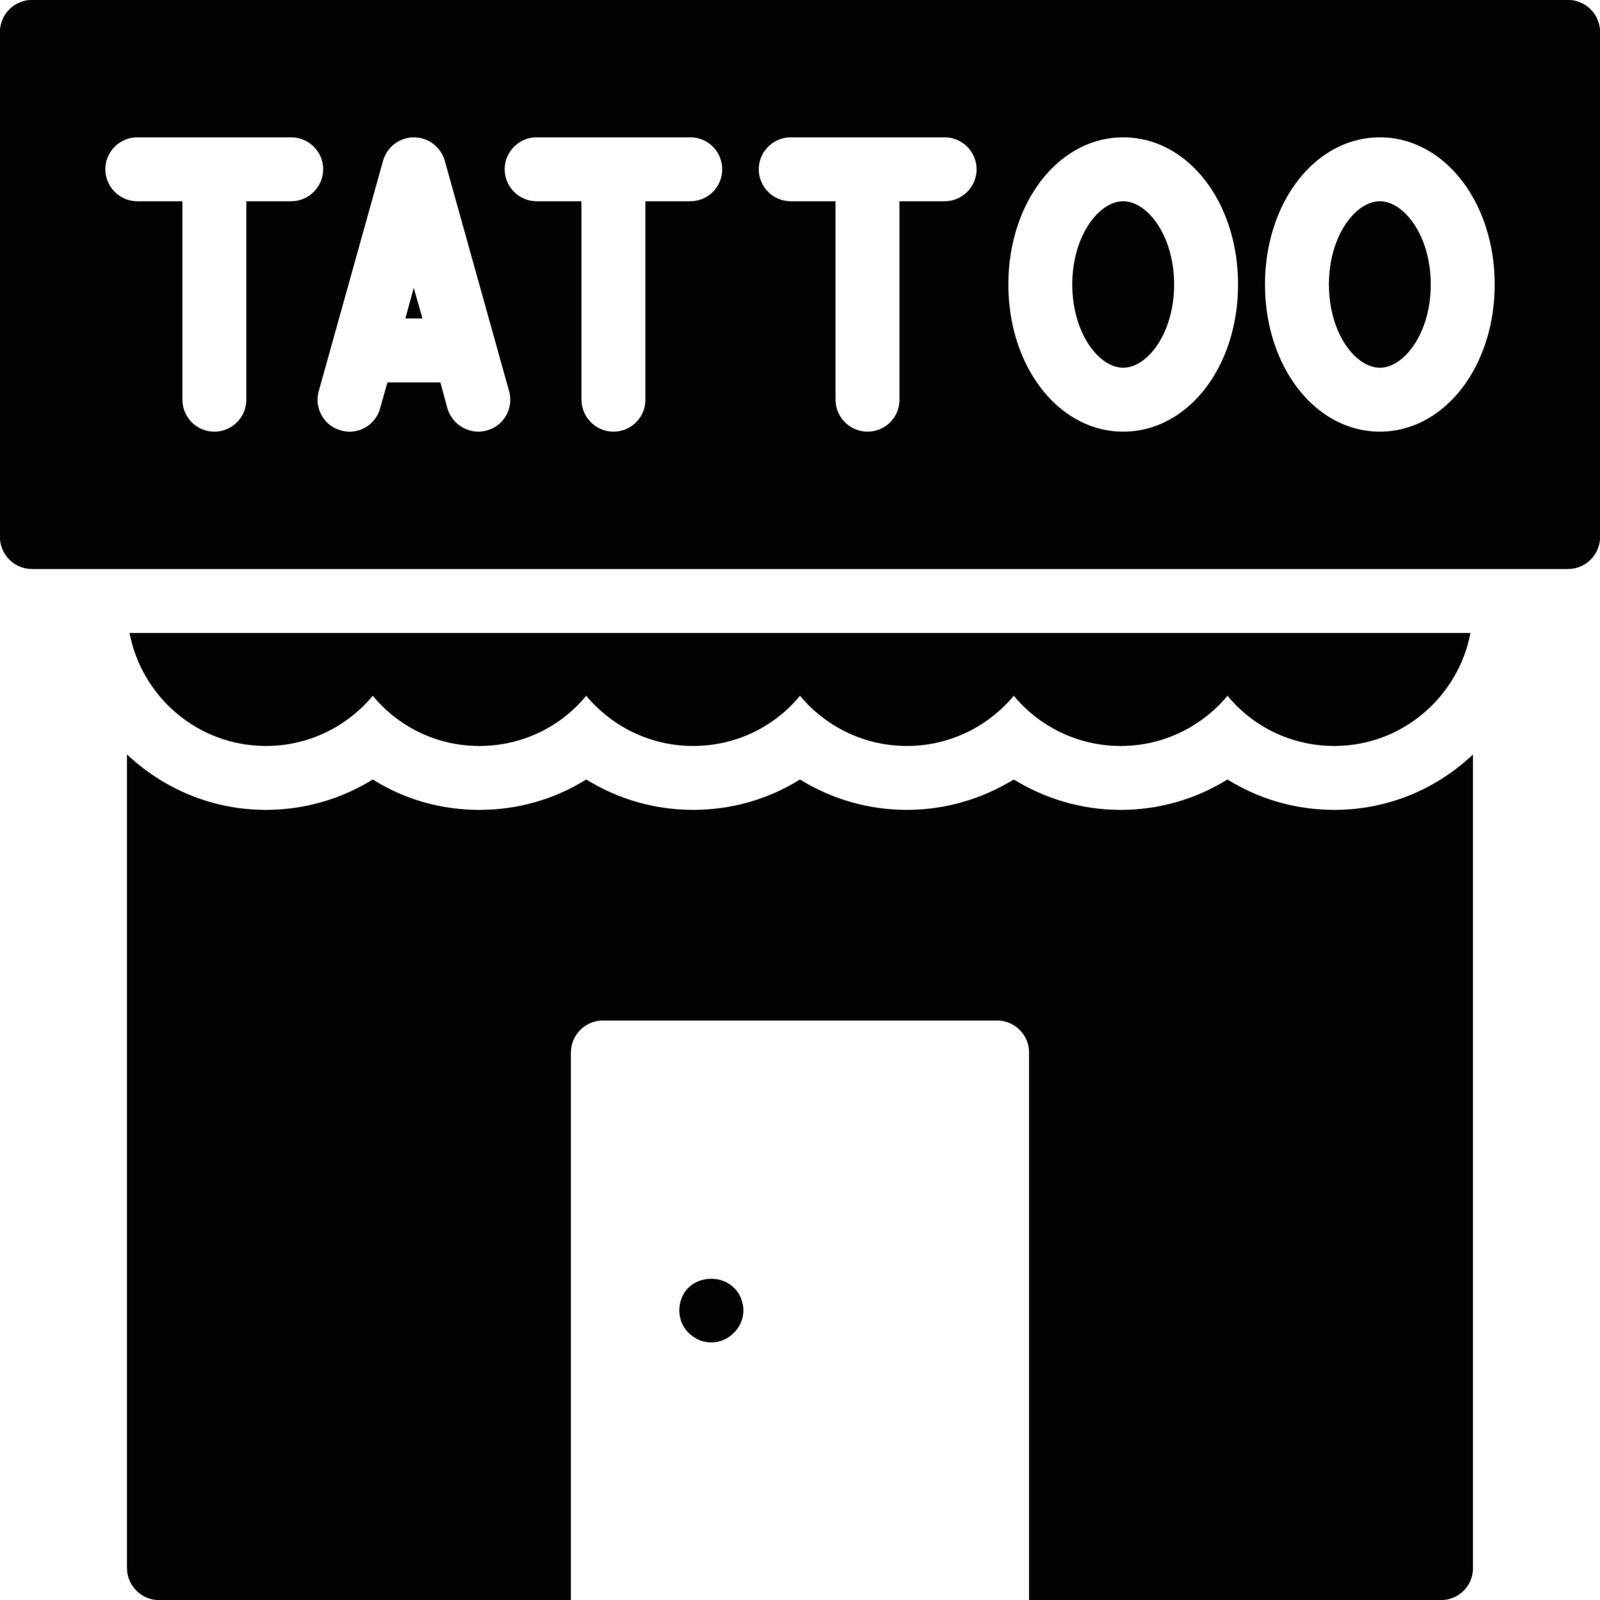 tattoo Vector illustration on a transparent background. Premium quality symbols. Gyliph vector icon for concept and graphic design.